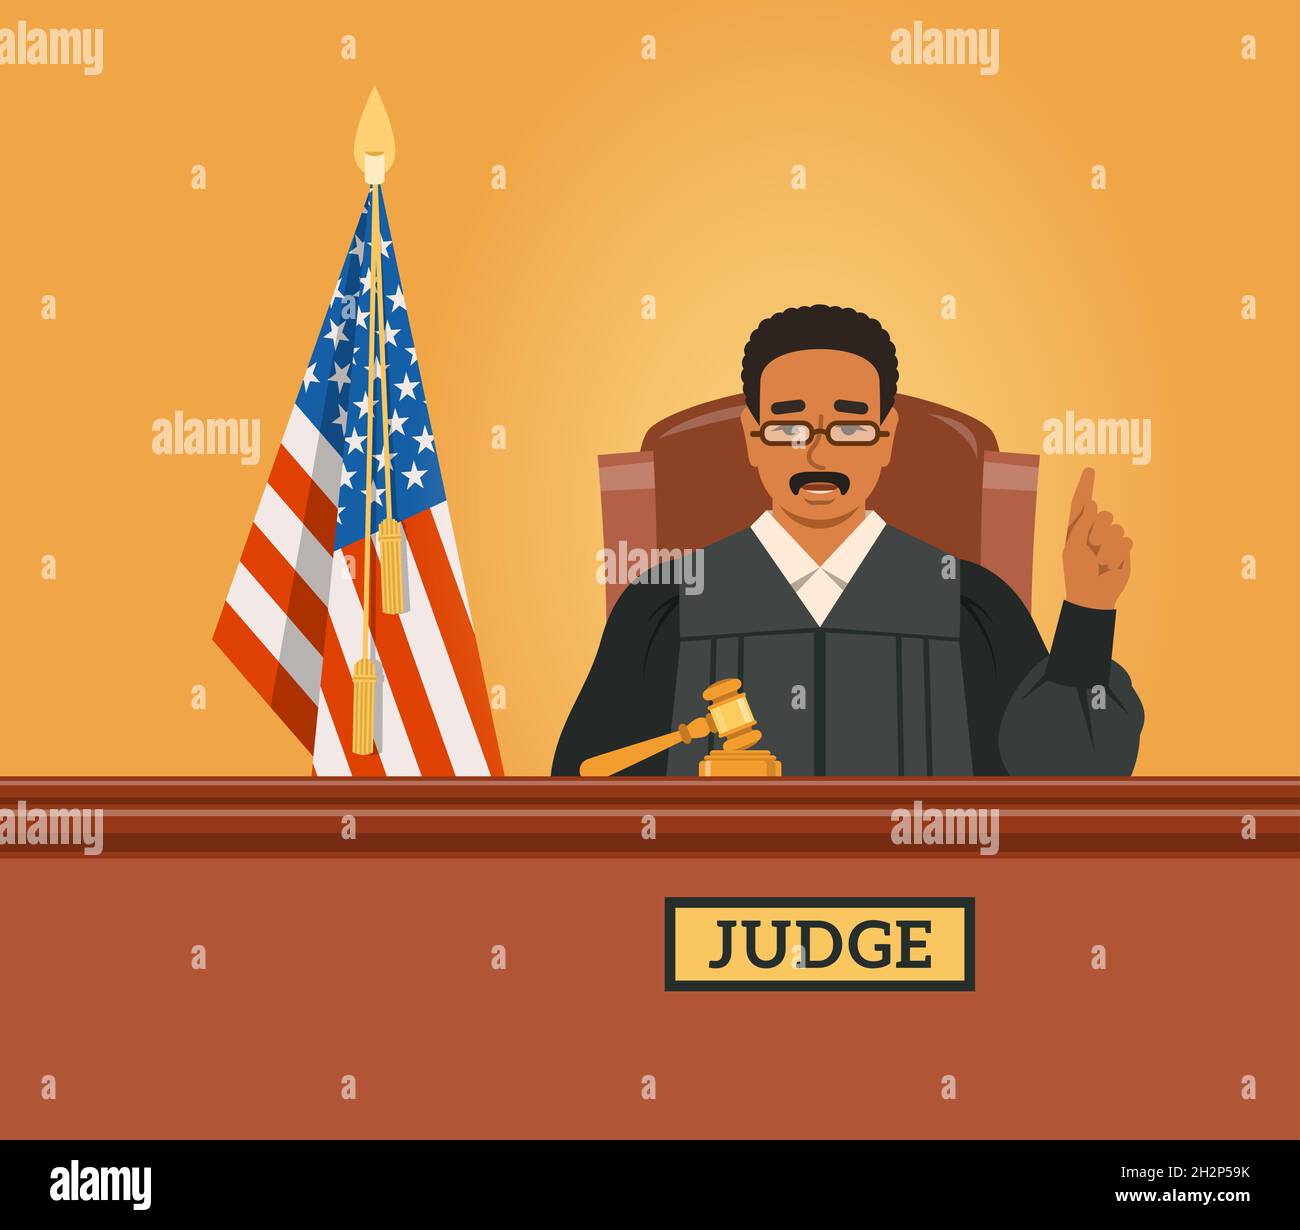 Judge black man in courtroom at tribunal with gavel and American flag points finger up pronouncing judgment. Judicial cartoon background. Civil and cr Stock Vector